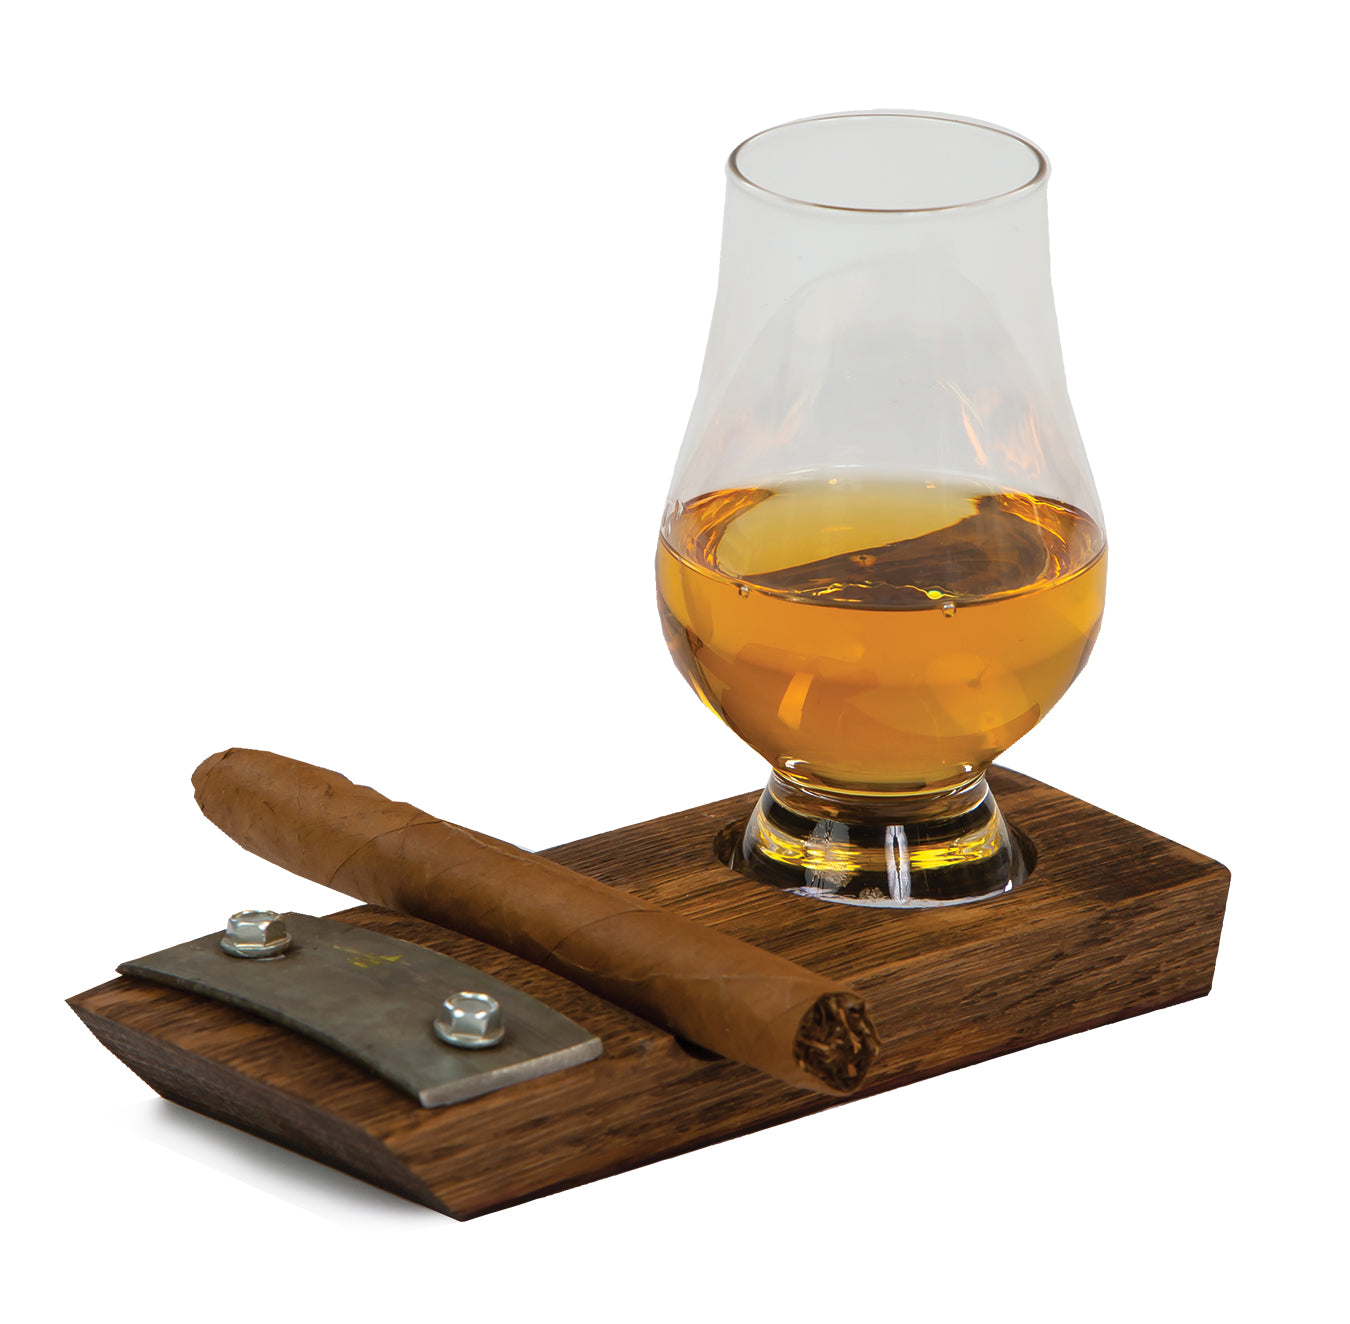 Oak & Olive - Picnic Plus Glencairn Whiskey & Cigar Coaster available at The Good Life Boutique